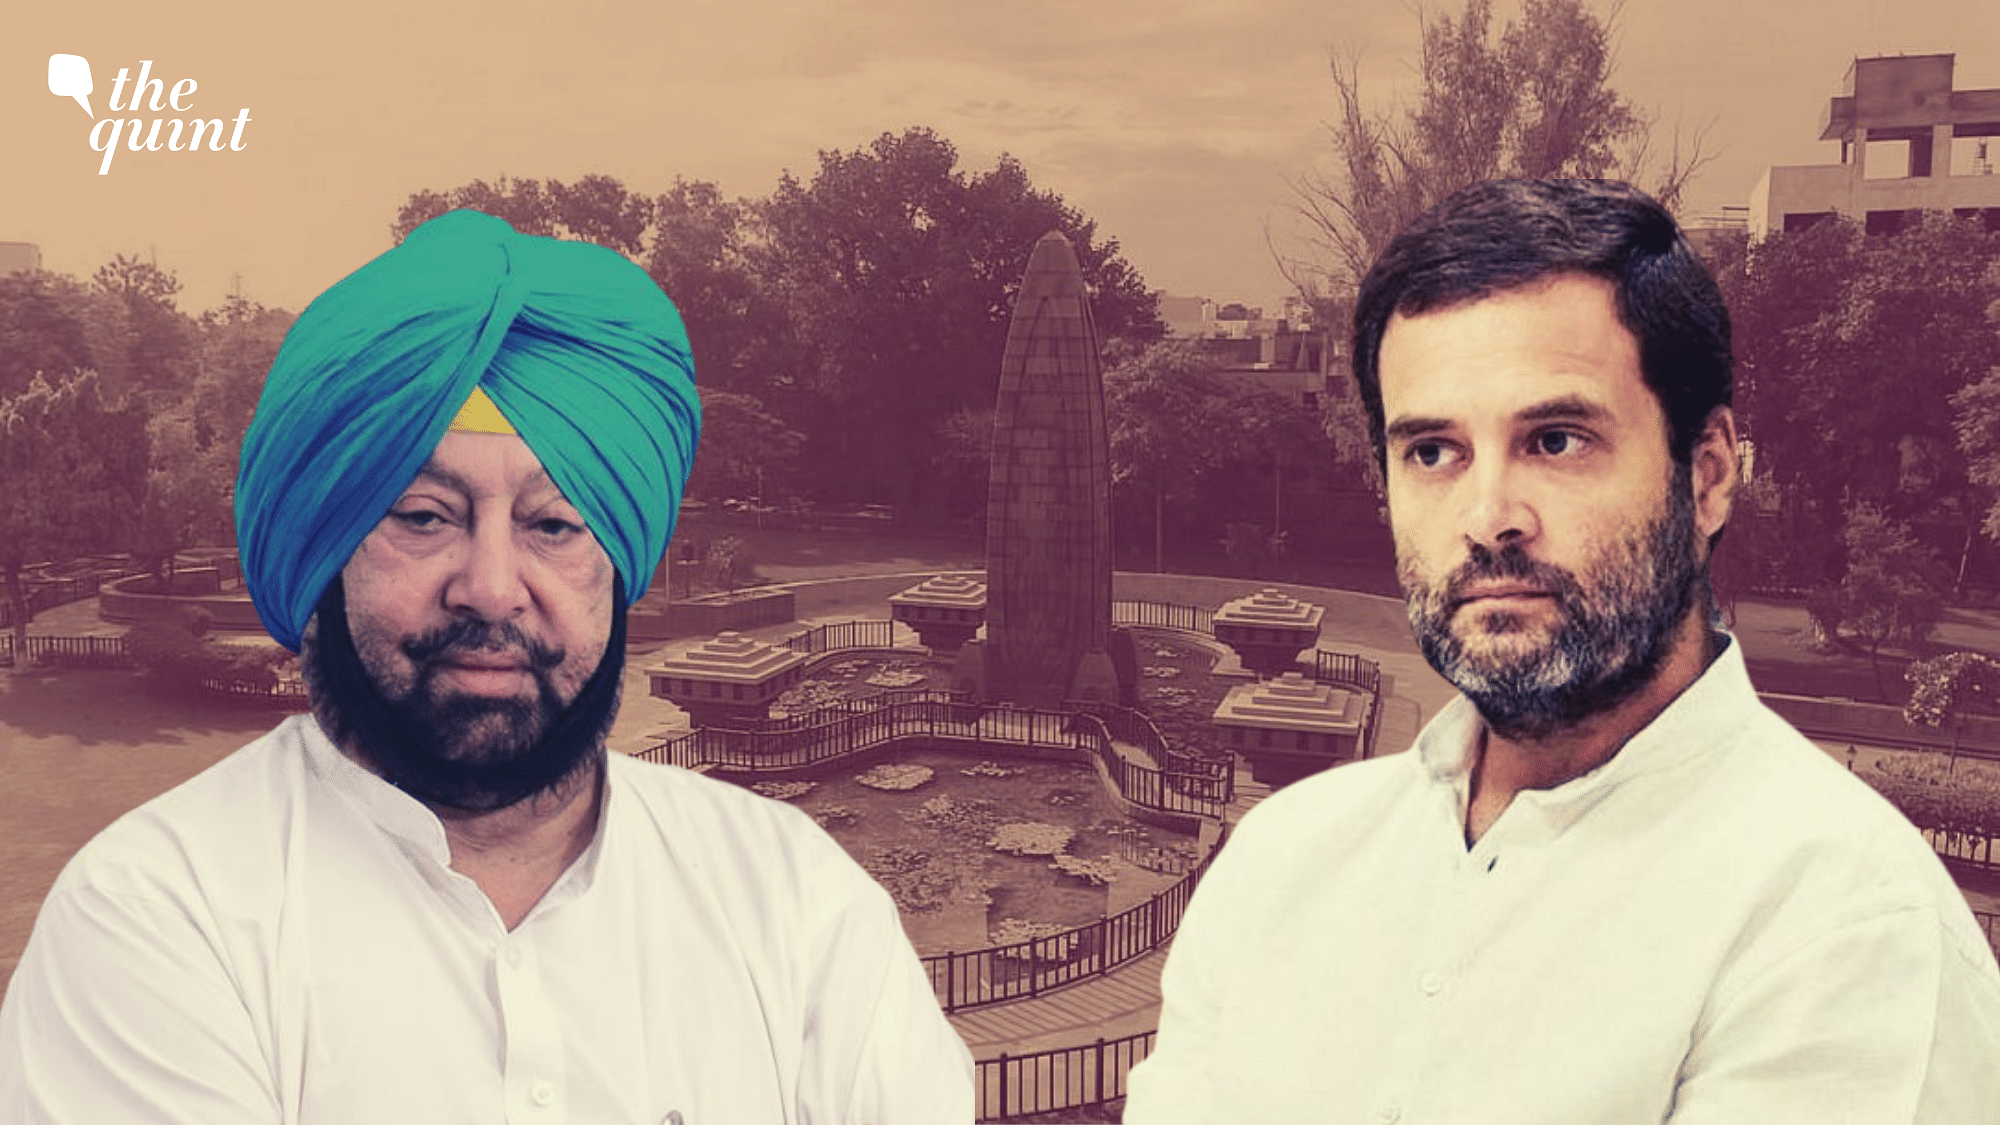 <div class="paragraphs"><p>Punjab CM Amarinder Singh on Tuesday, offered support for the revamped Jallianwalla Bagh memorial, saying that it “looks very nice”, despite criticism from Rahul Gandhi who called the renovations “an insult to the martyrs of Jallianwala Bagh”. Image used for representational purposes.&nbsp;</p></div>